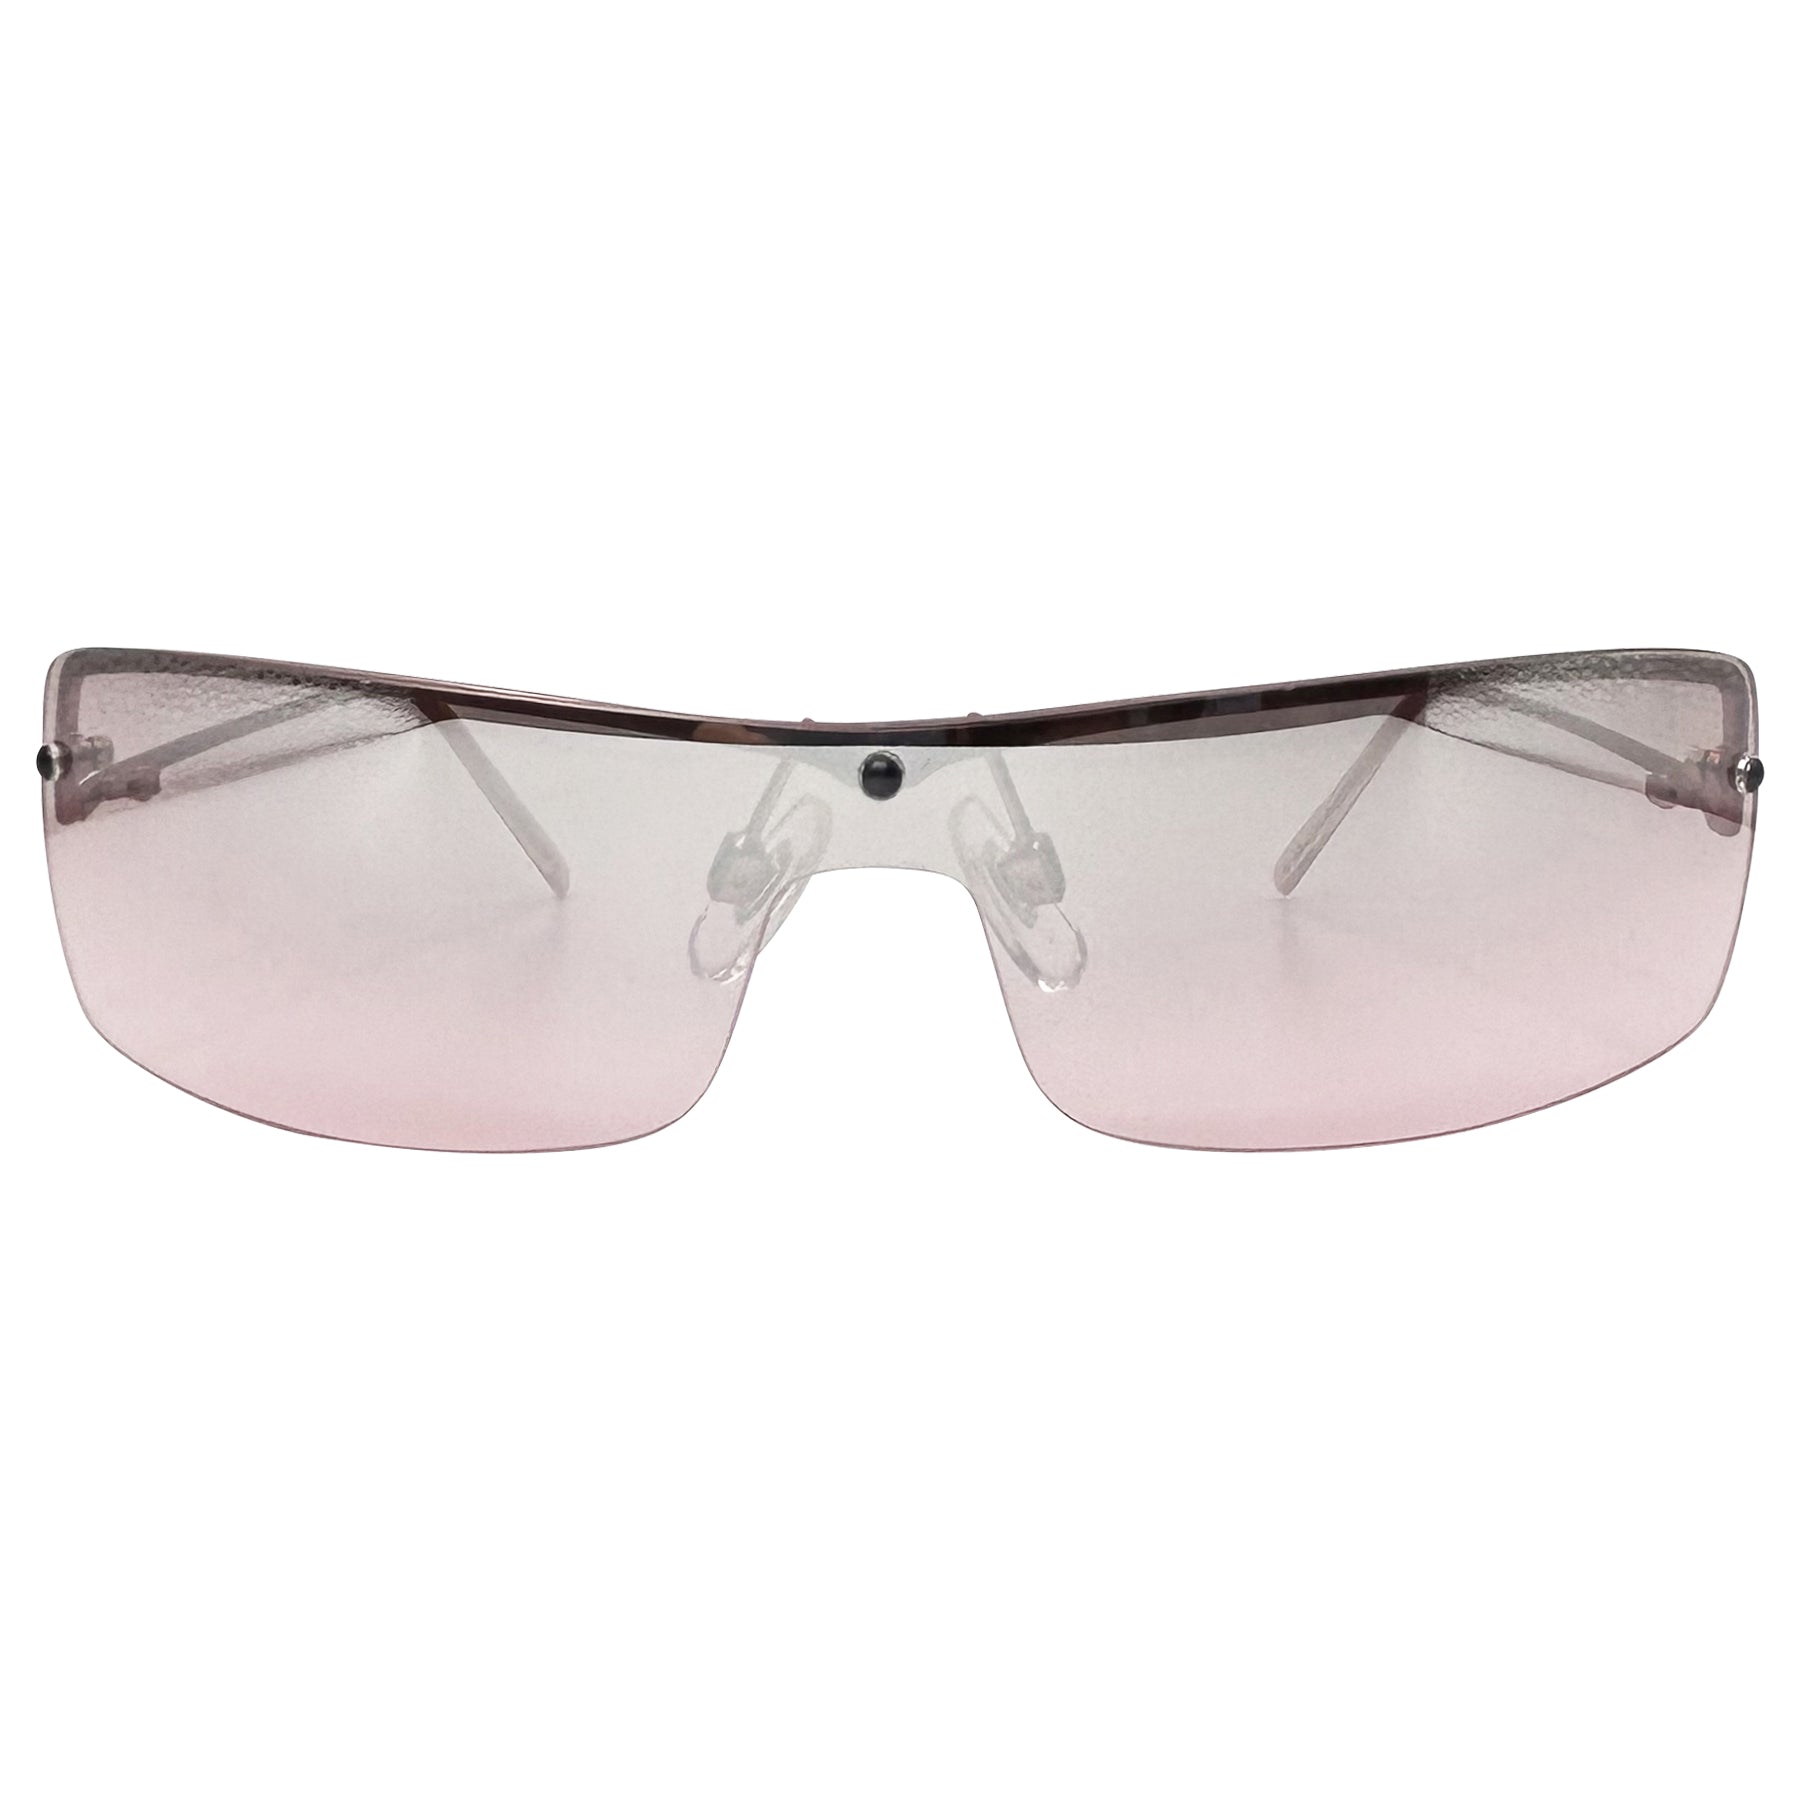 pink colored sunglasses with a metal y2k style frame 